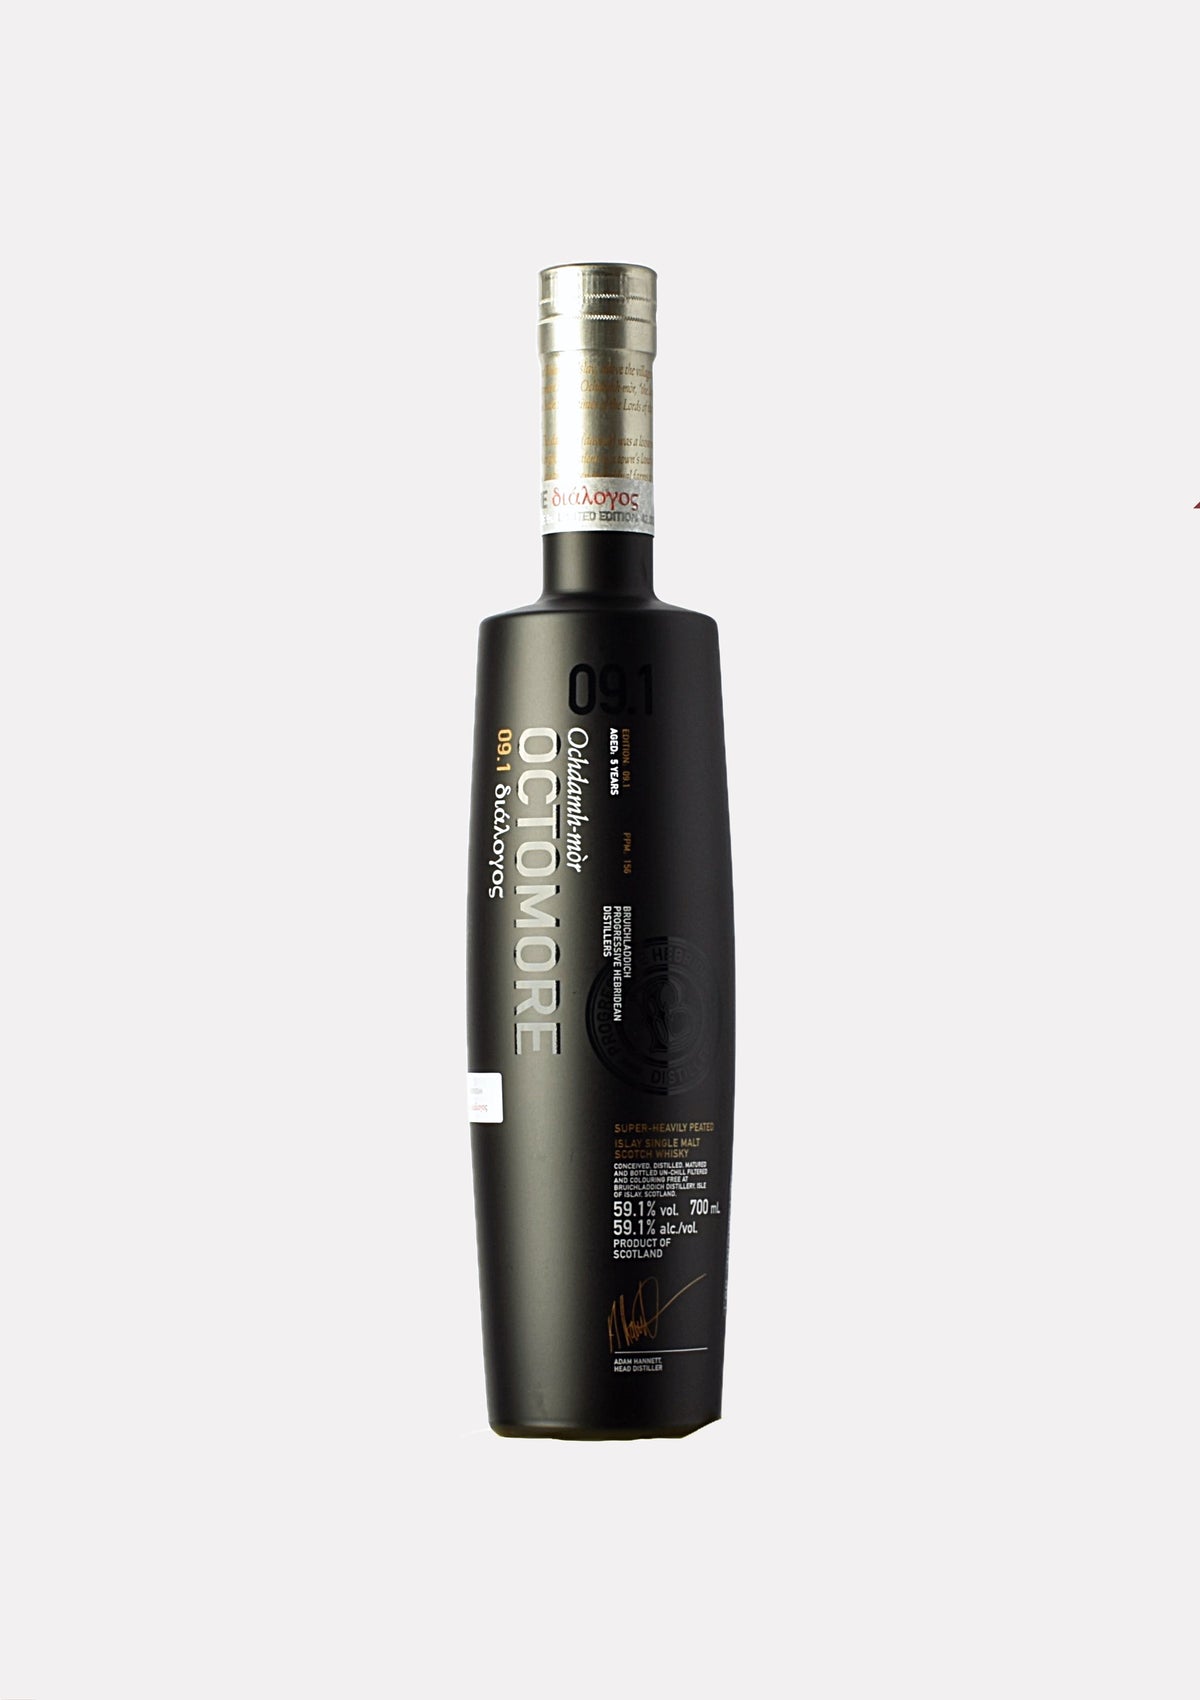 Octomore 2012- 2018 5 Jahre 09.1 156 ppm